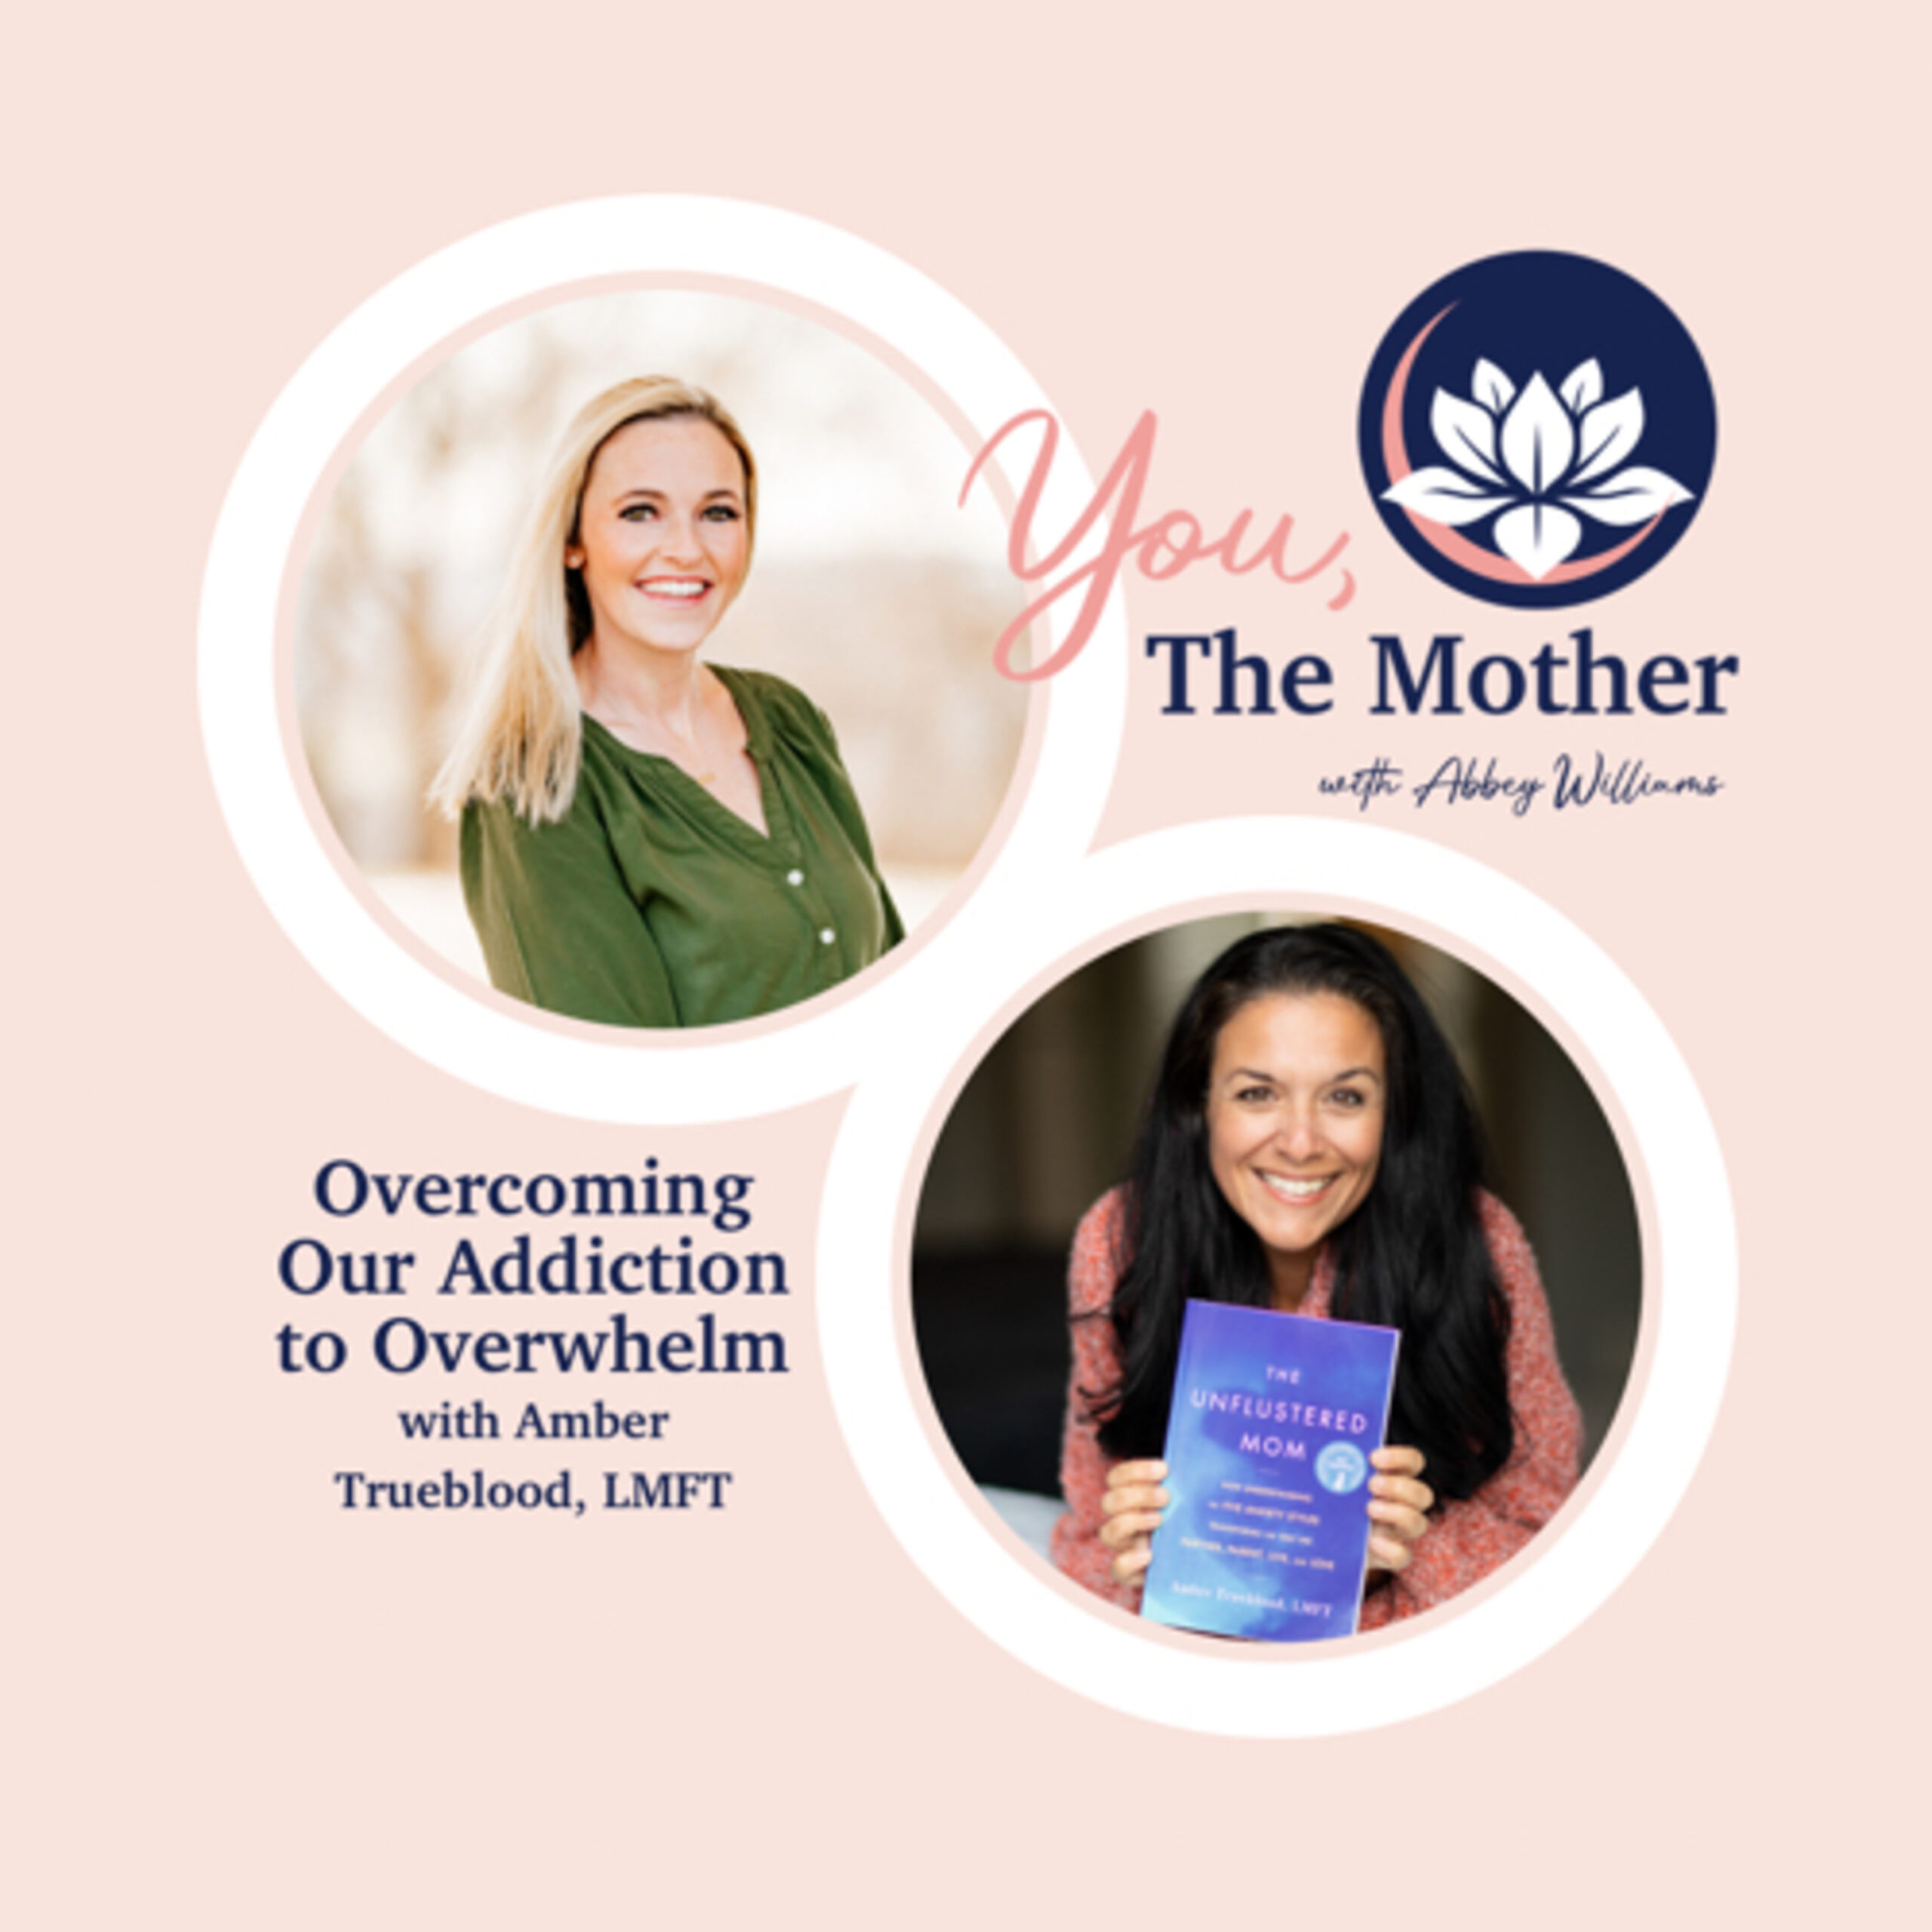 Overcoming our Addiction to Overwhelm with Amber Trueblood, LMFT